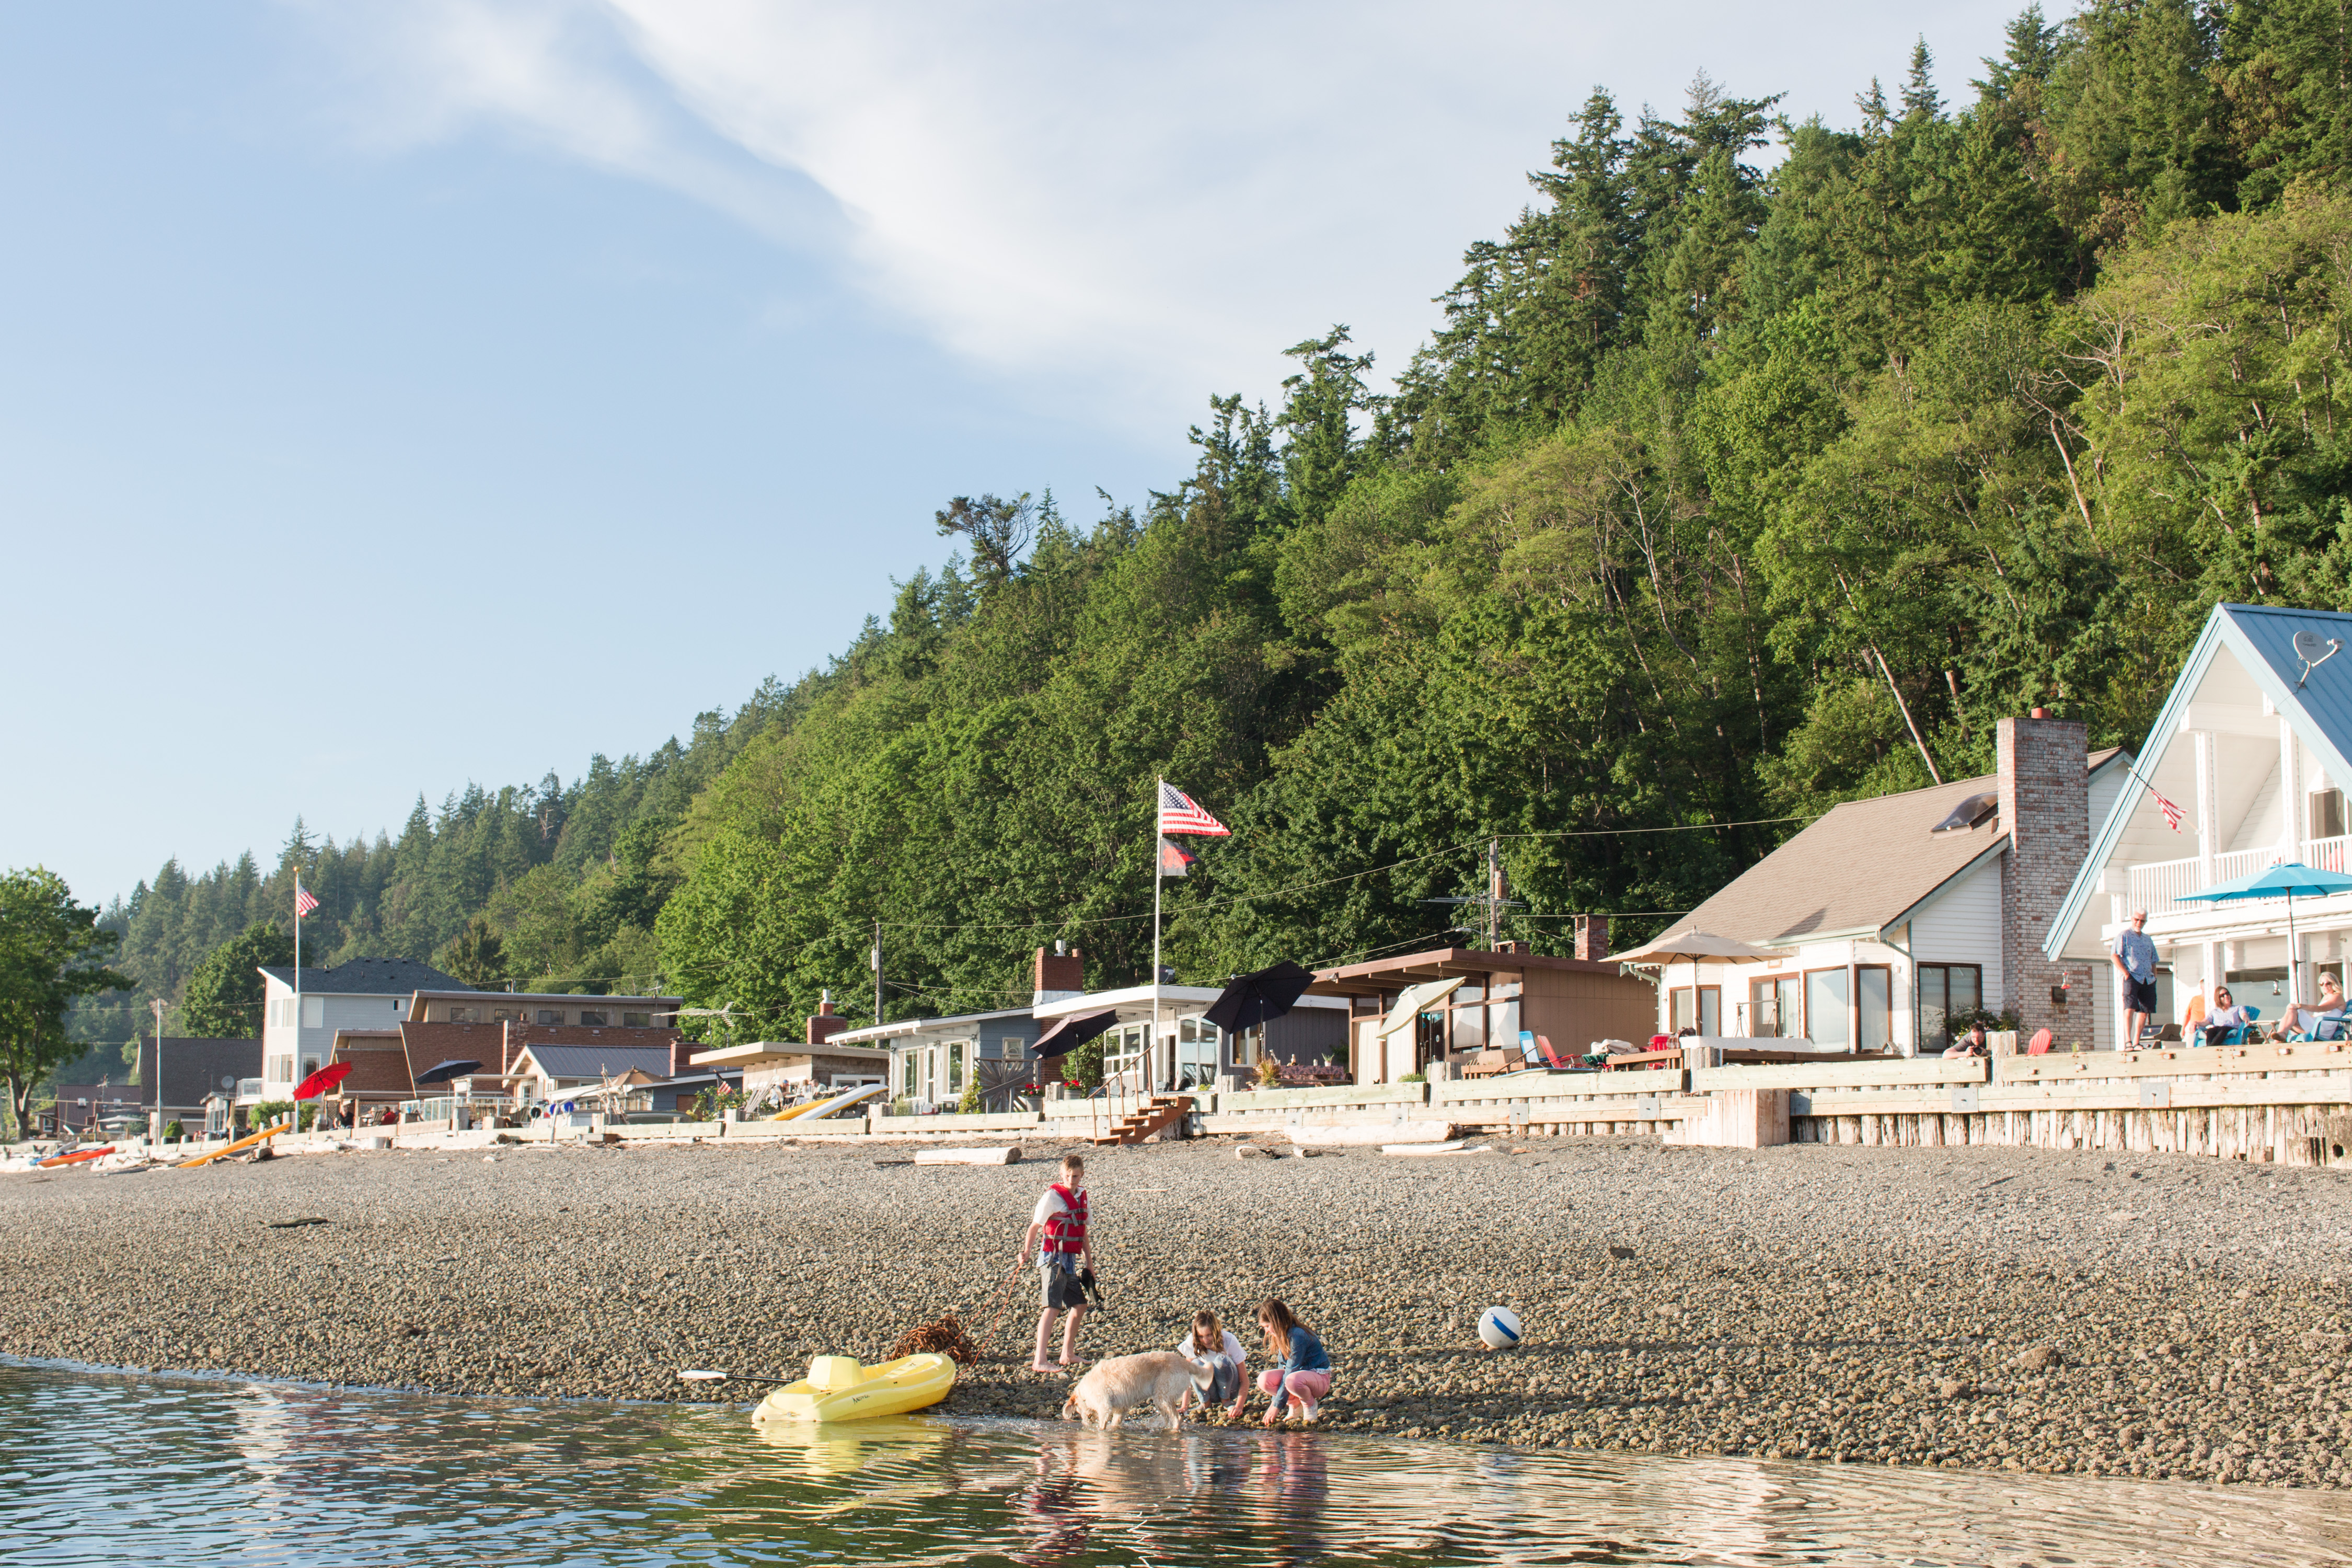 <a href="http://stanwood-camano-windermere.withwre.com/mckees-beach"><h4>McKees Beach</h4>
Stanwood</a>